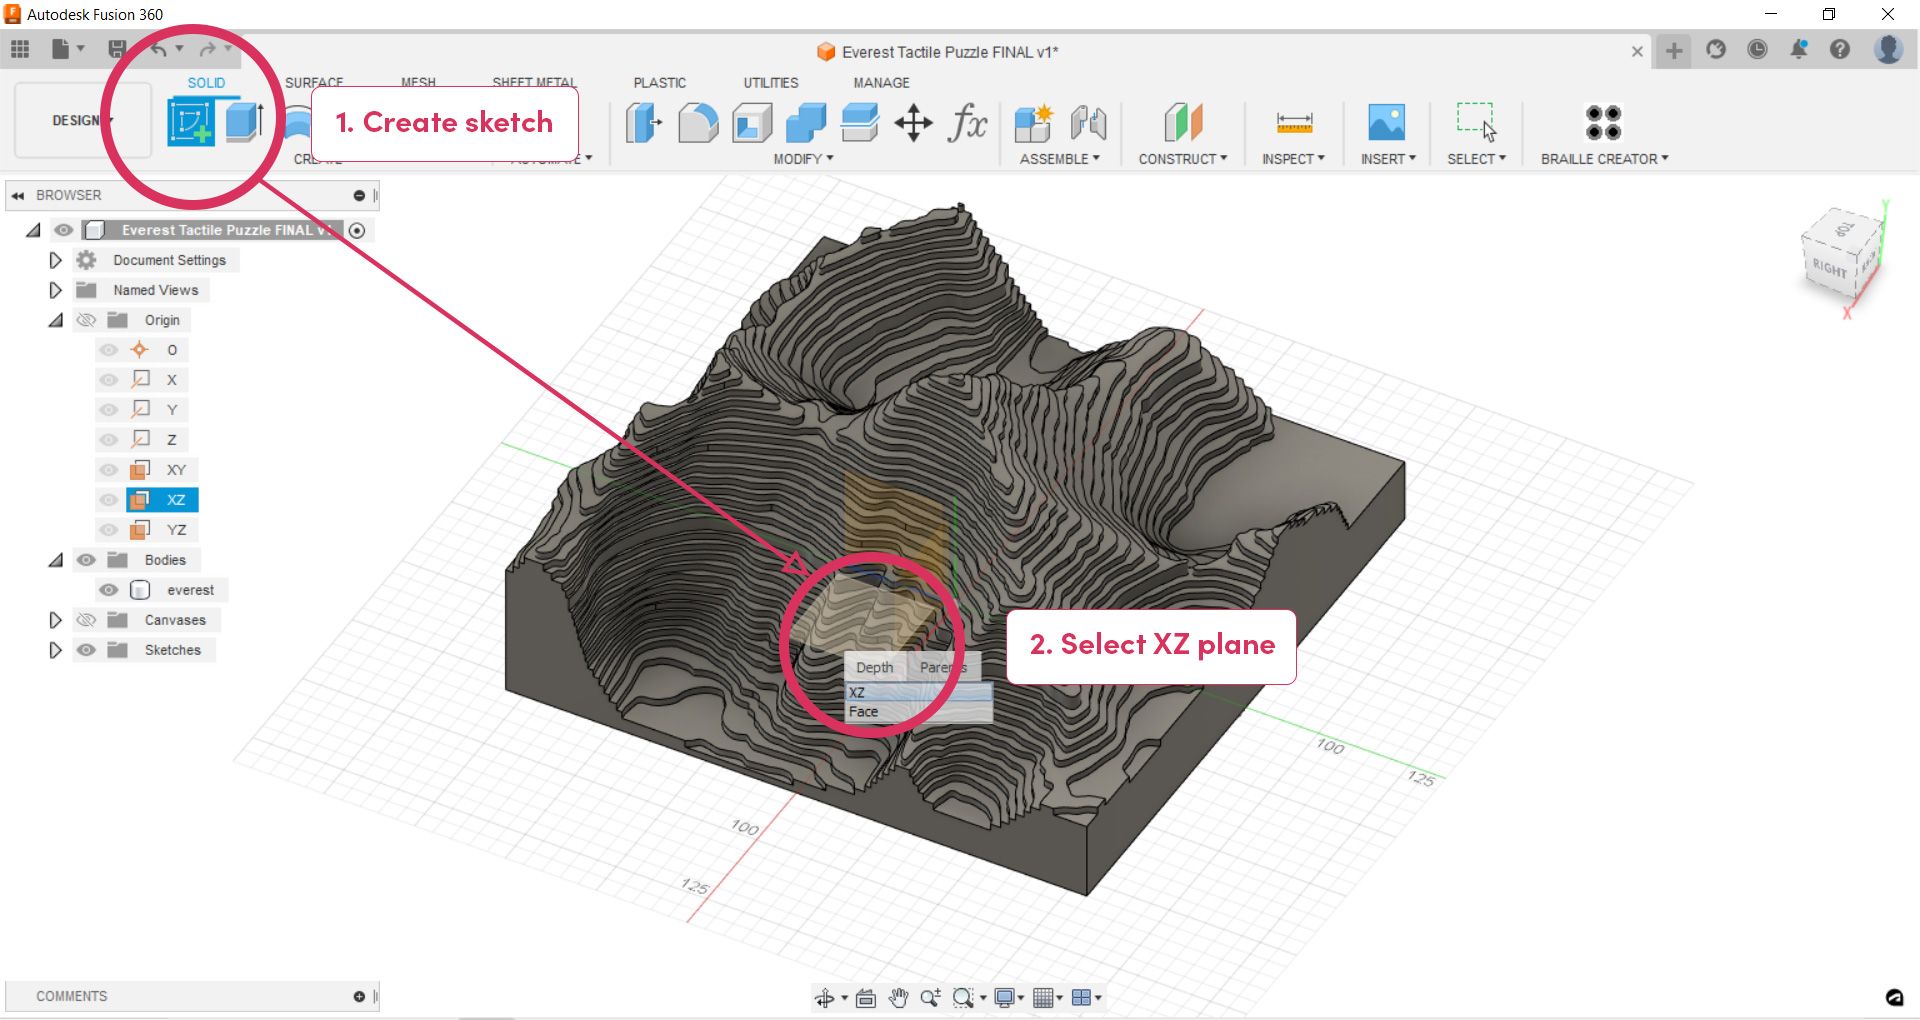 "Create Sketch" tool being used to create a three dimensional contour map of Mt Everest in Fusion 360 software.